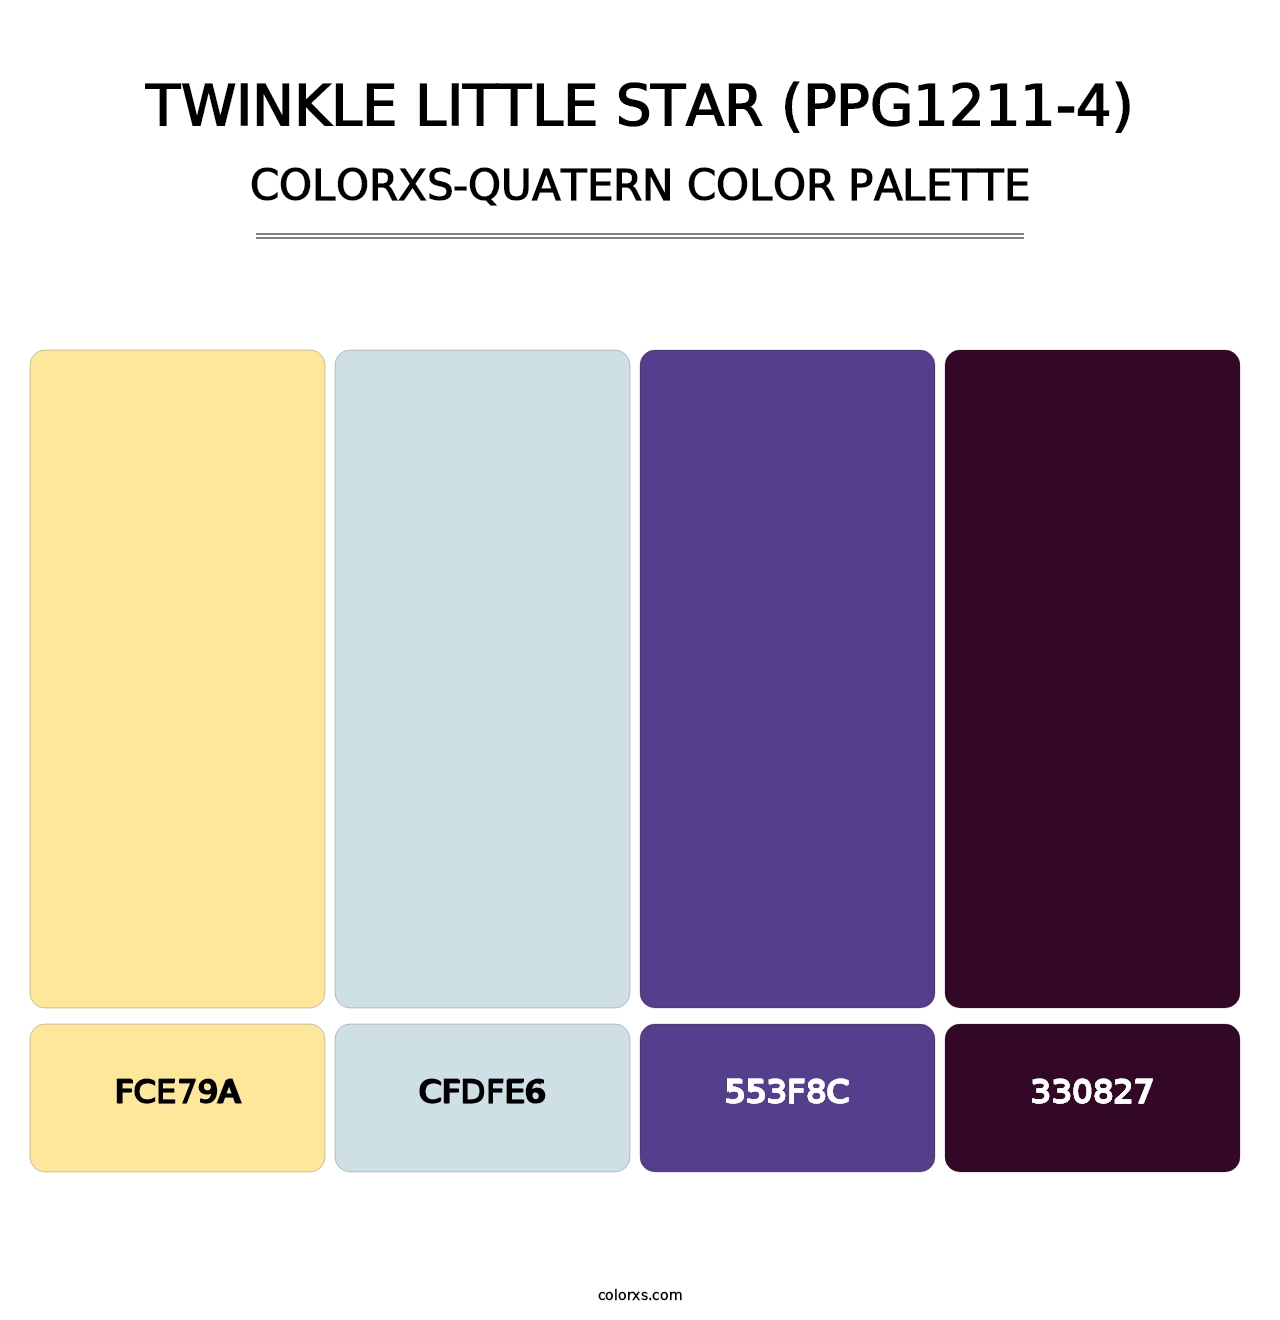 Twinkle Little Star (PPG1211-4) - Colorxs Quatern Palette